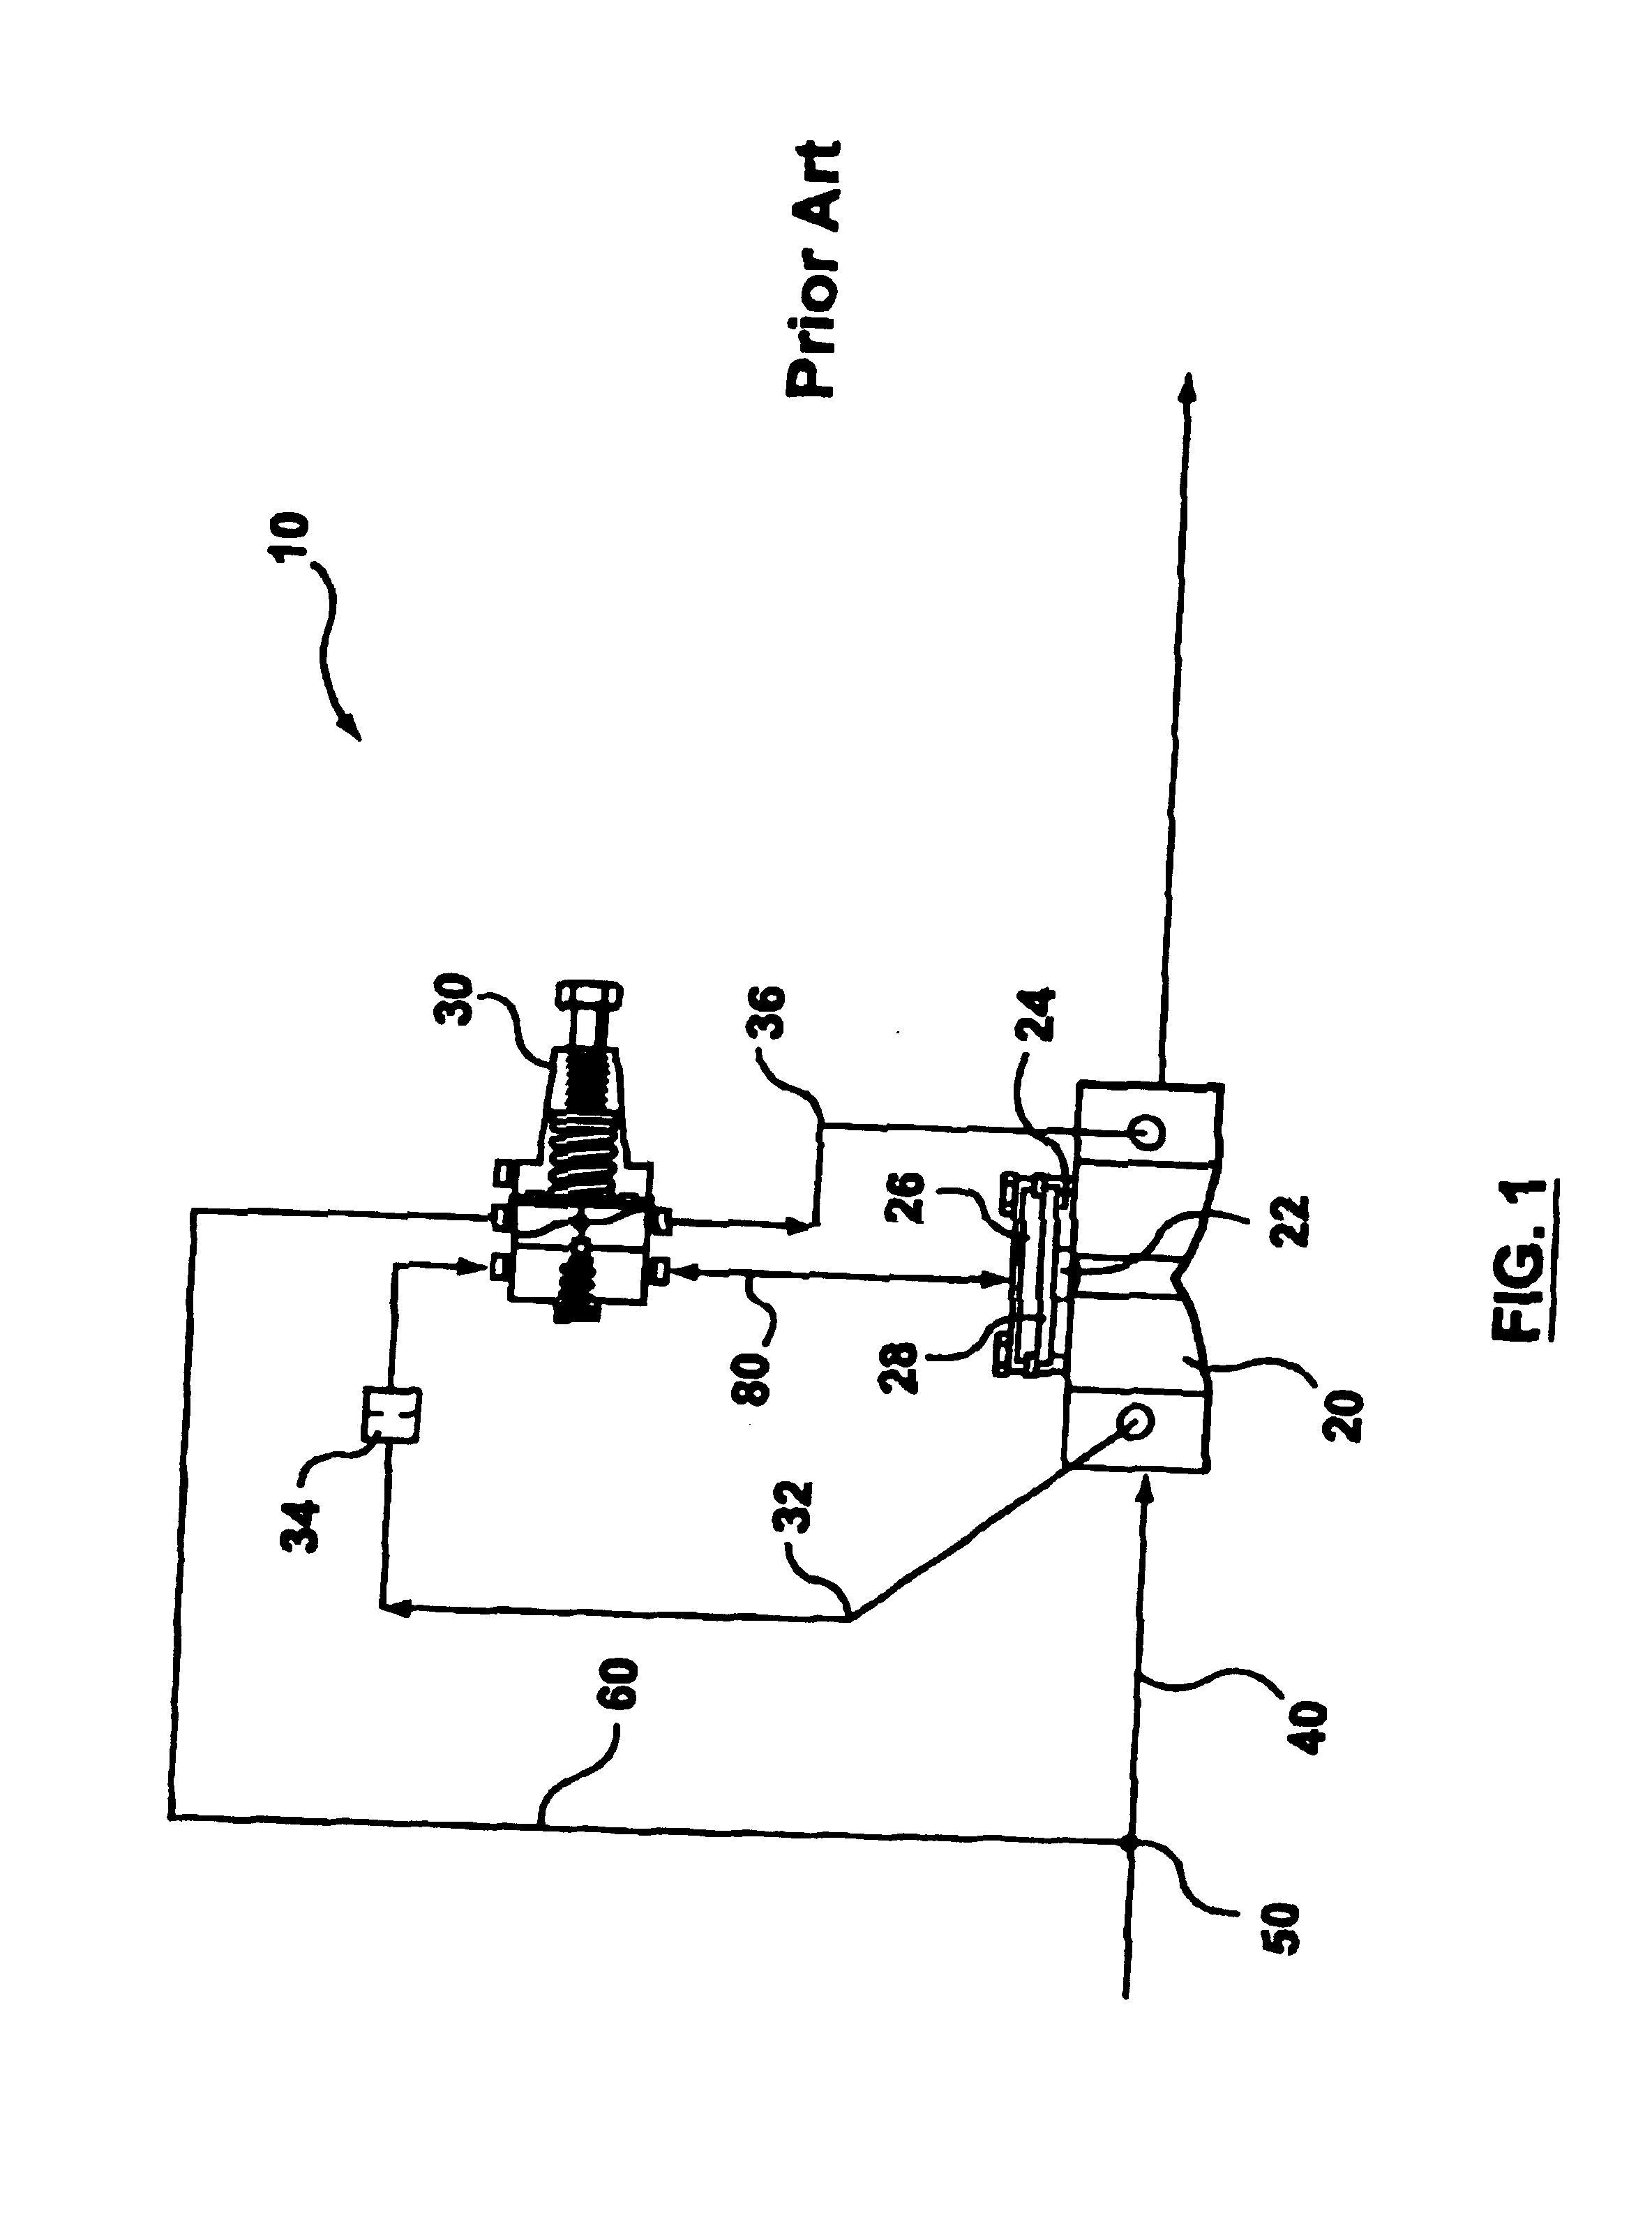 Pressure control system for low pressure operation